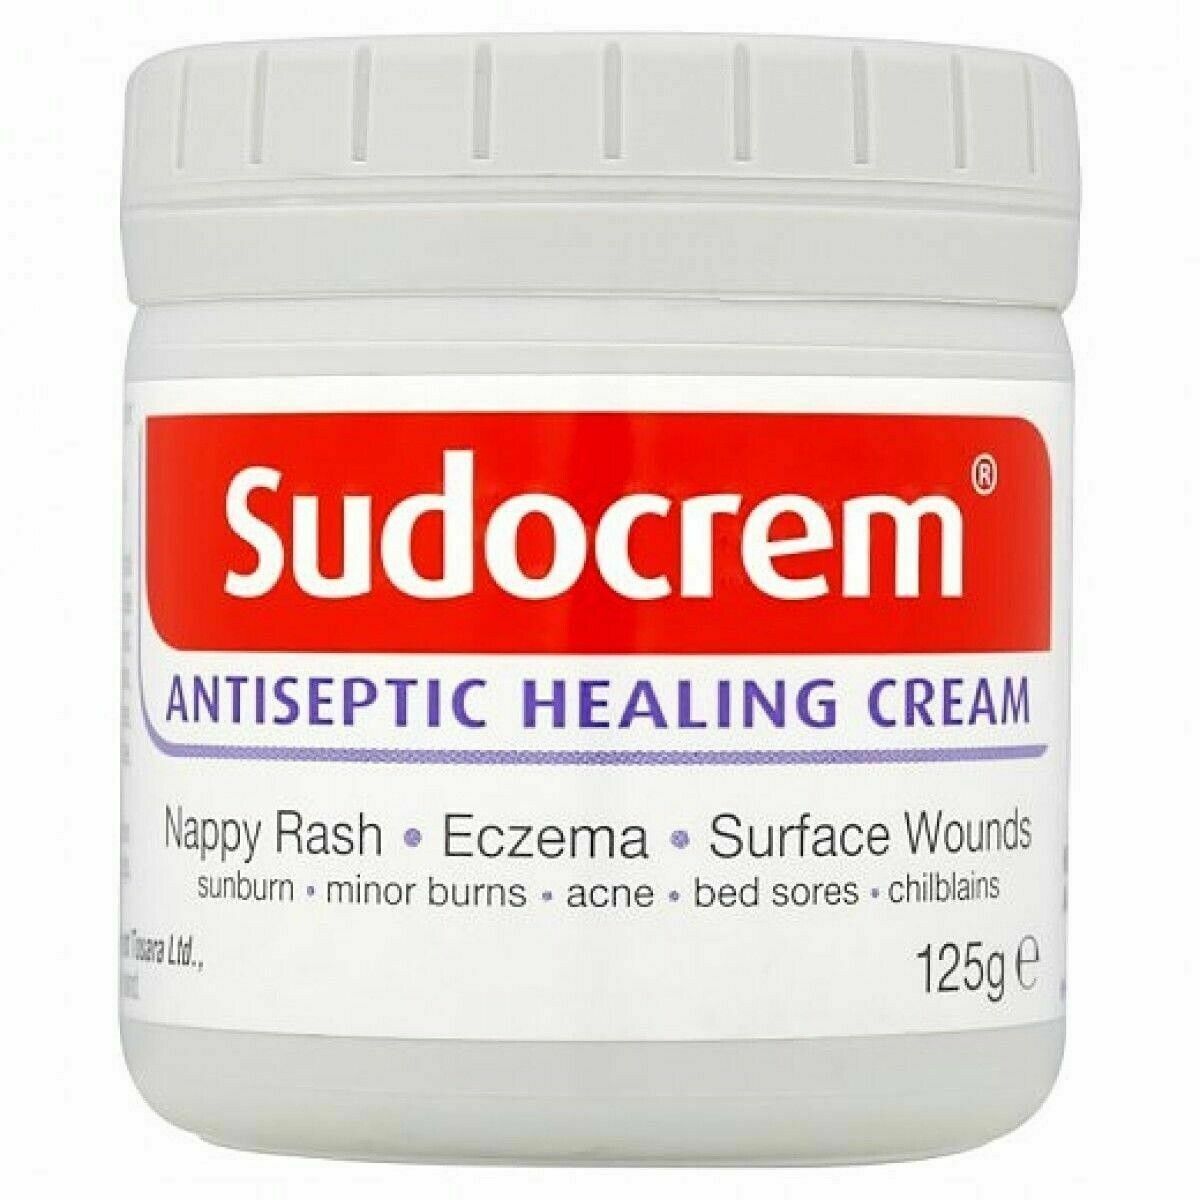 Sudocrem Antiseptic Healing Cream 125g - Free First Class Shipping & Usa Seller